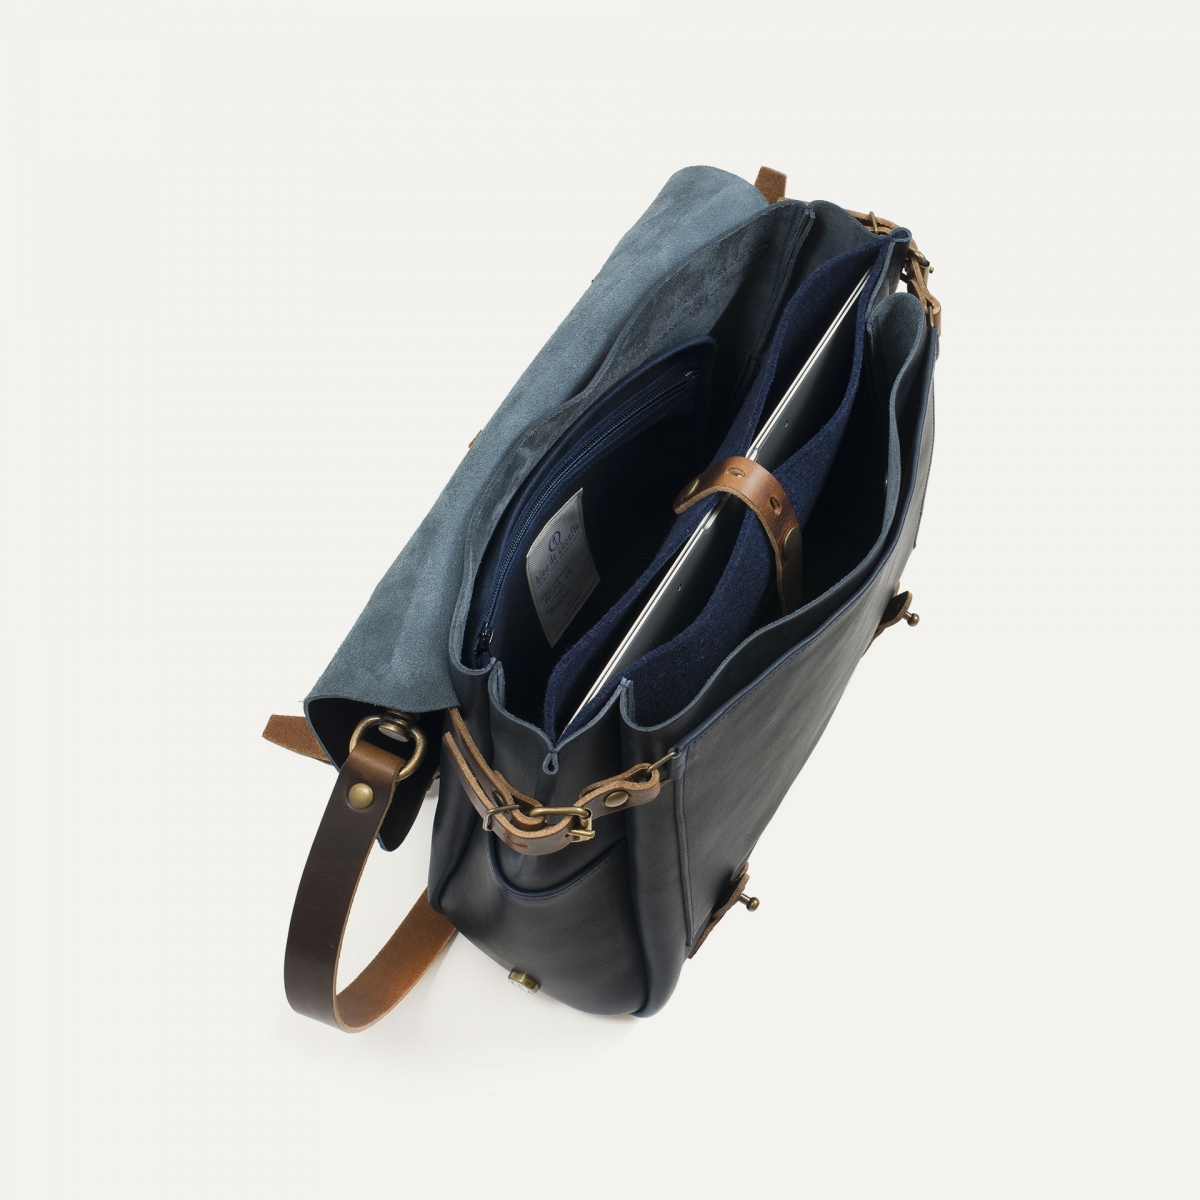 Olympus x Bleu de Chauffe: New leather accessory collection